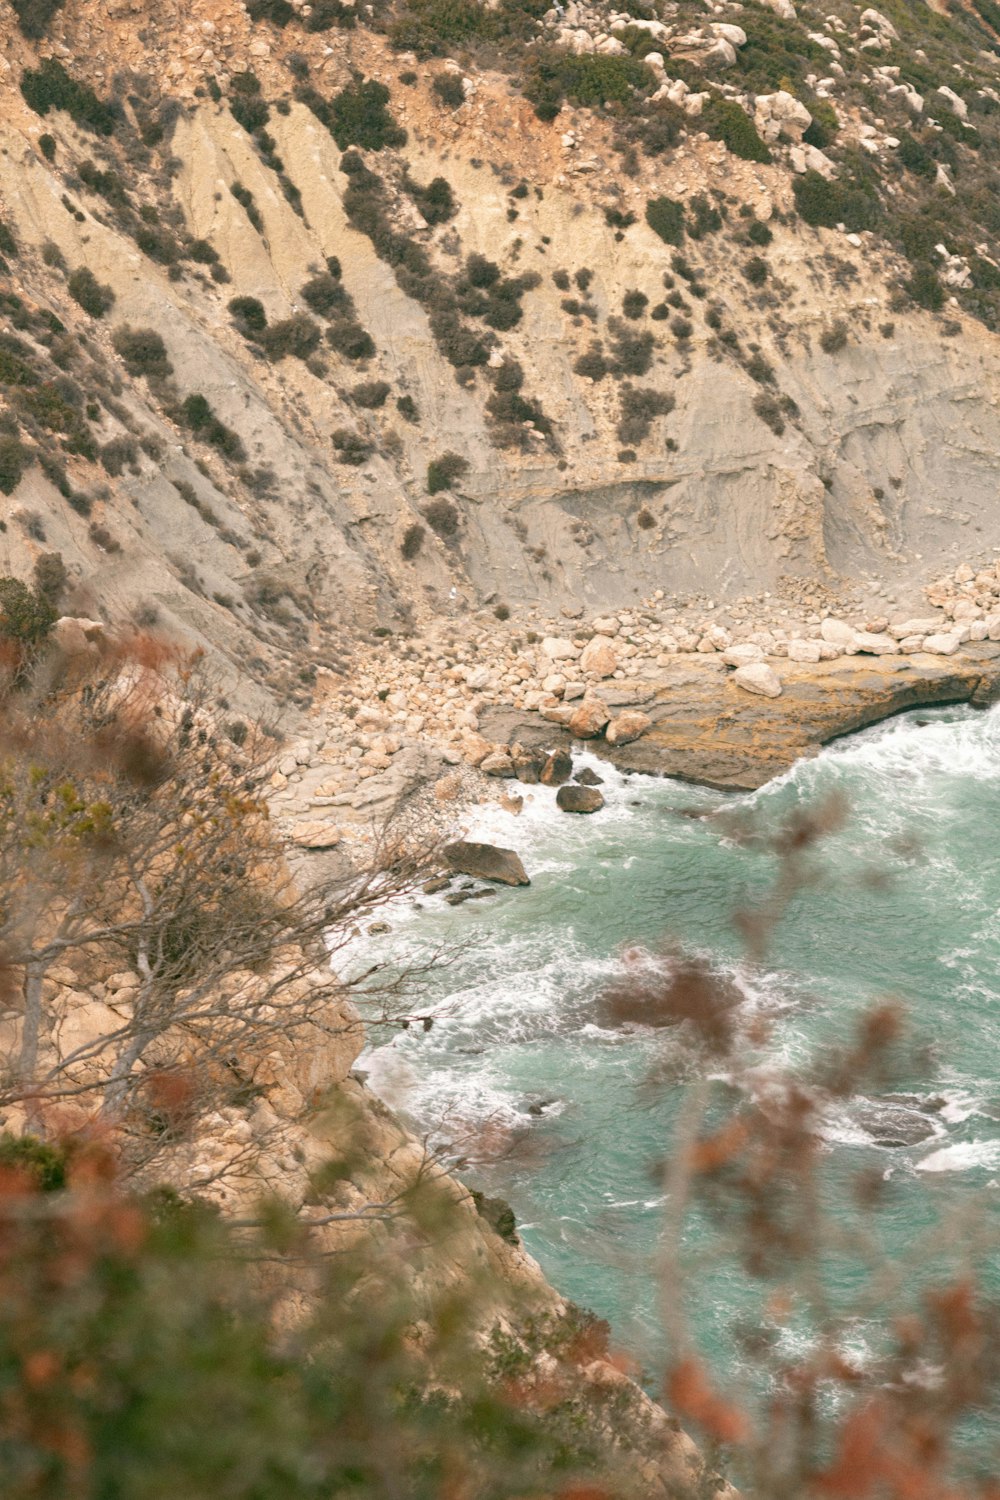 a view of a body of water near a cliff